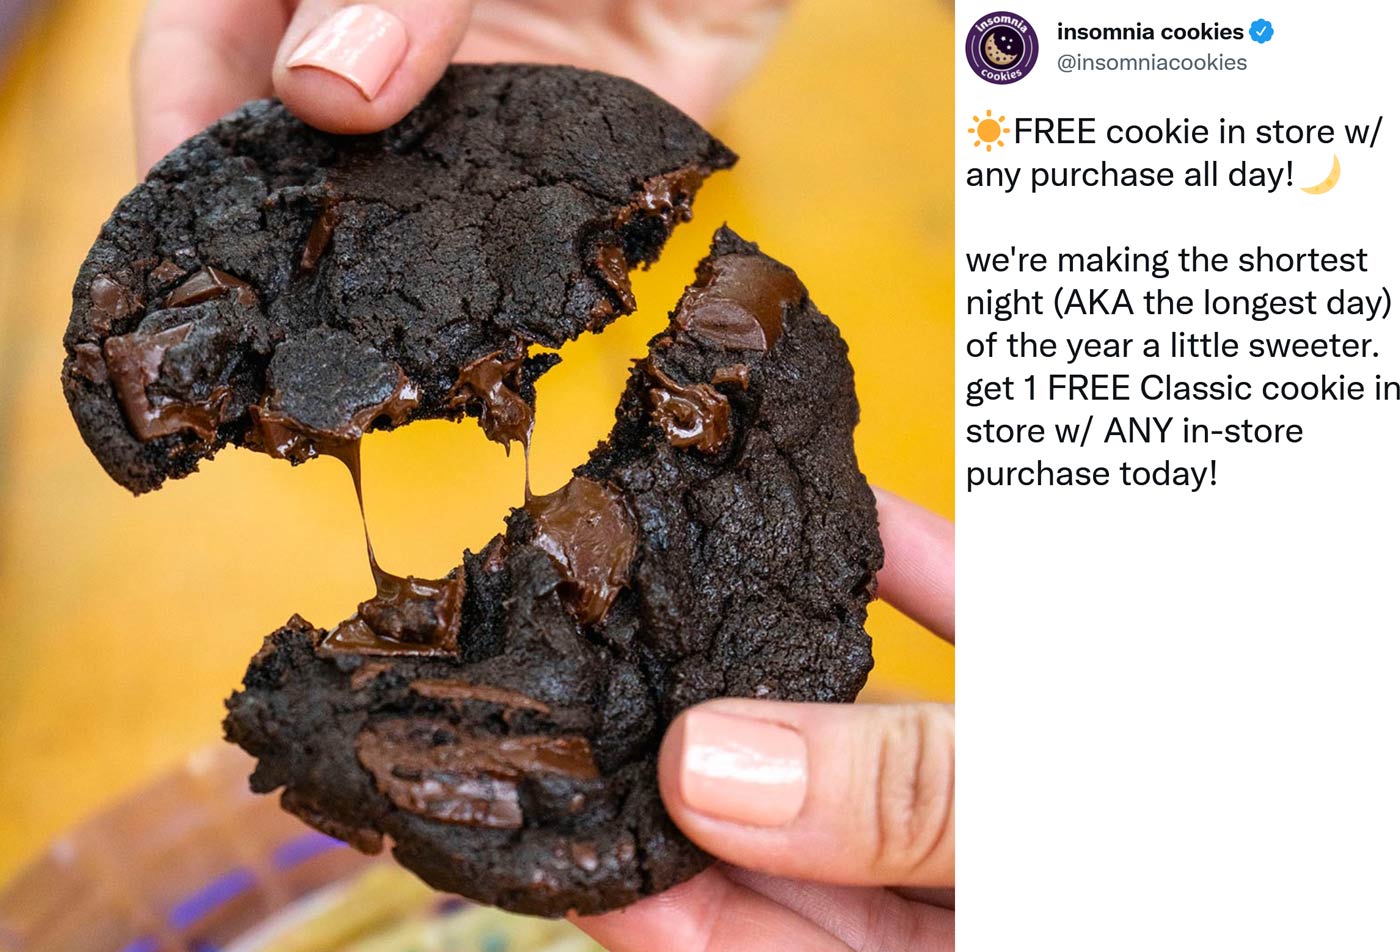 Insomnia Cookies coupons & promo code for [August 2022]